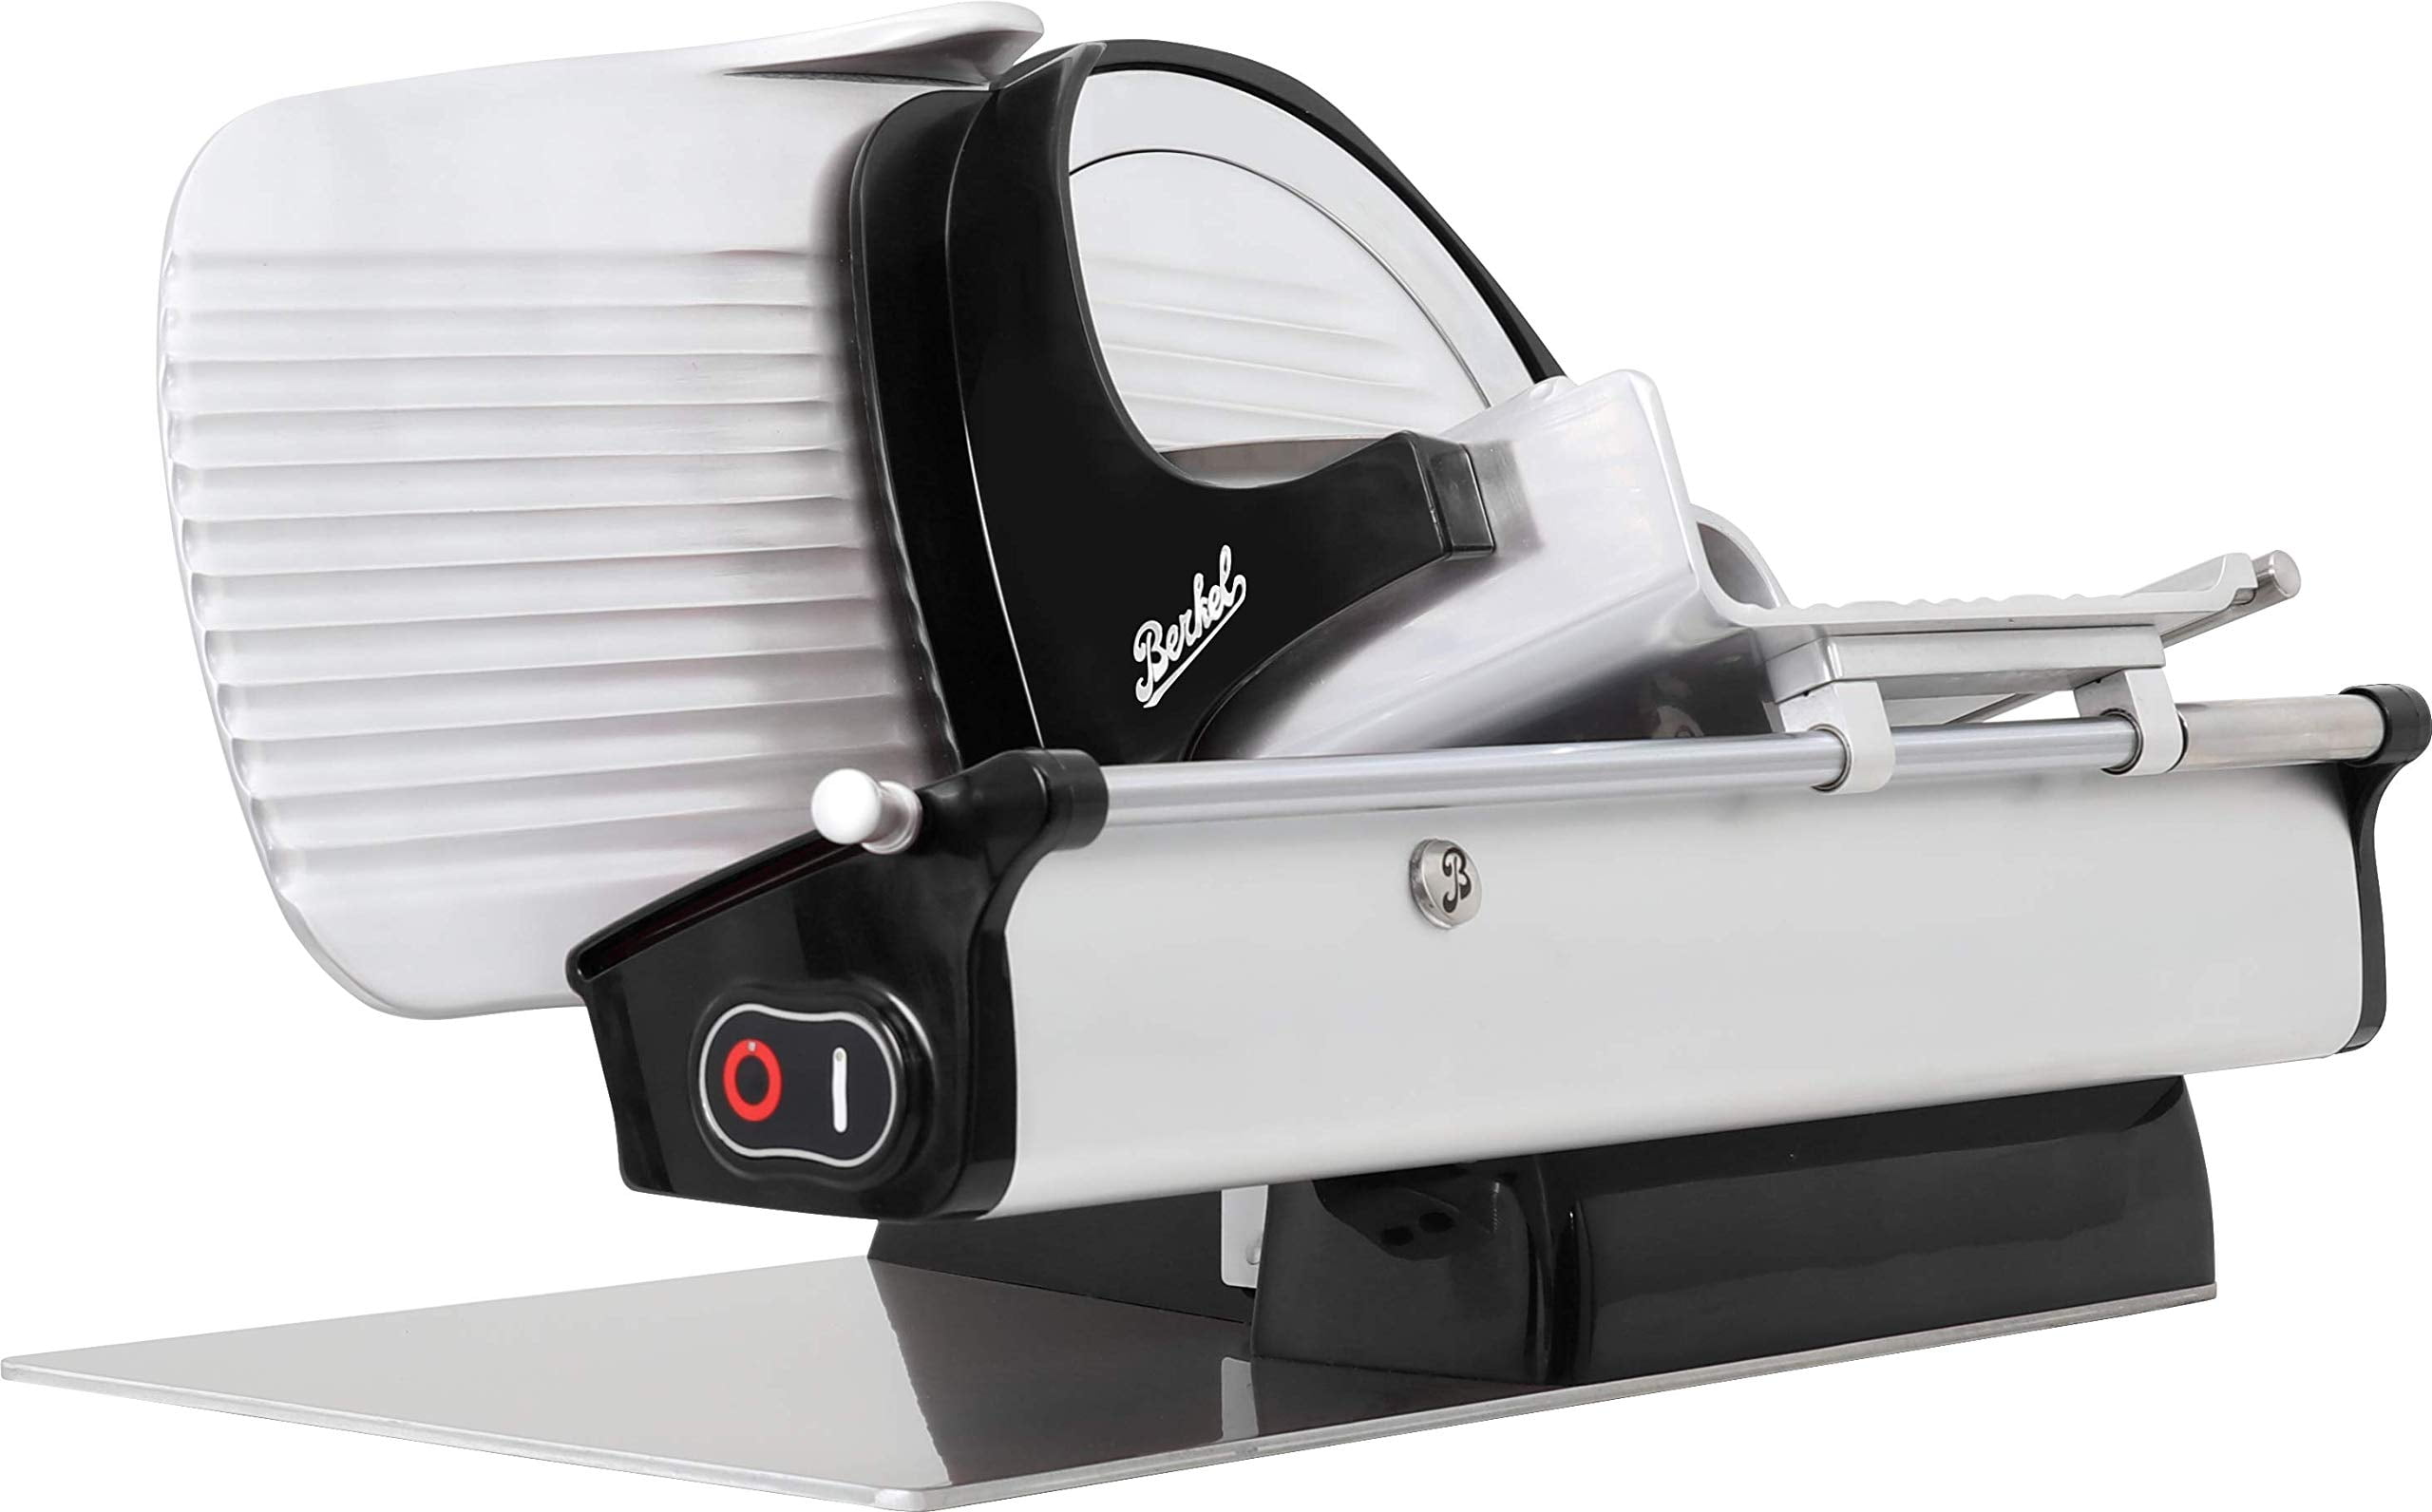 Meat Slicers for home use by Berkel